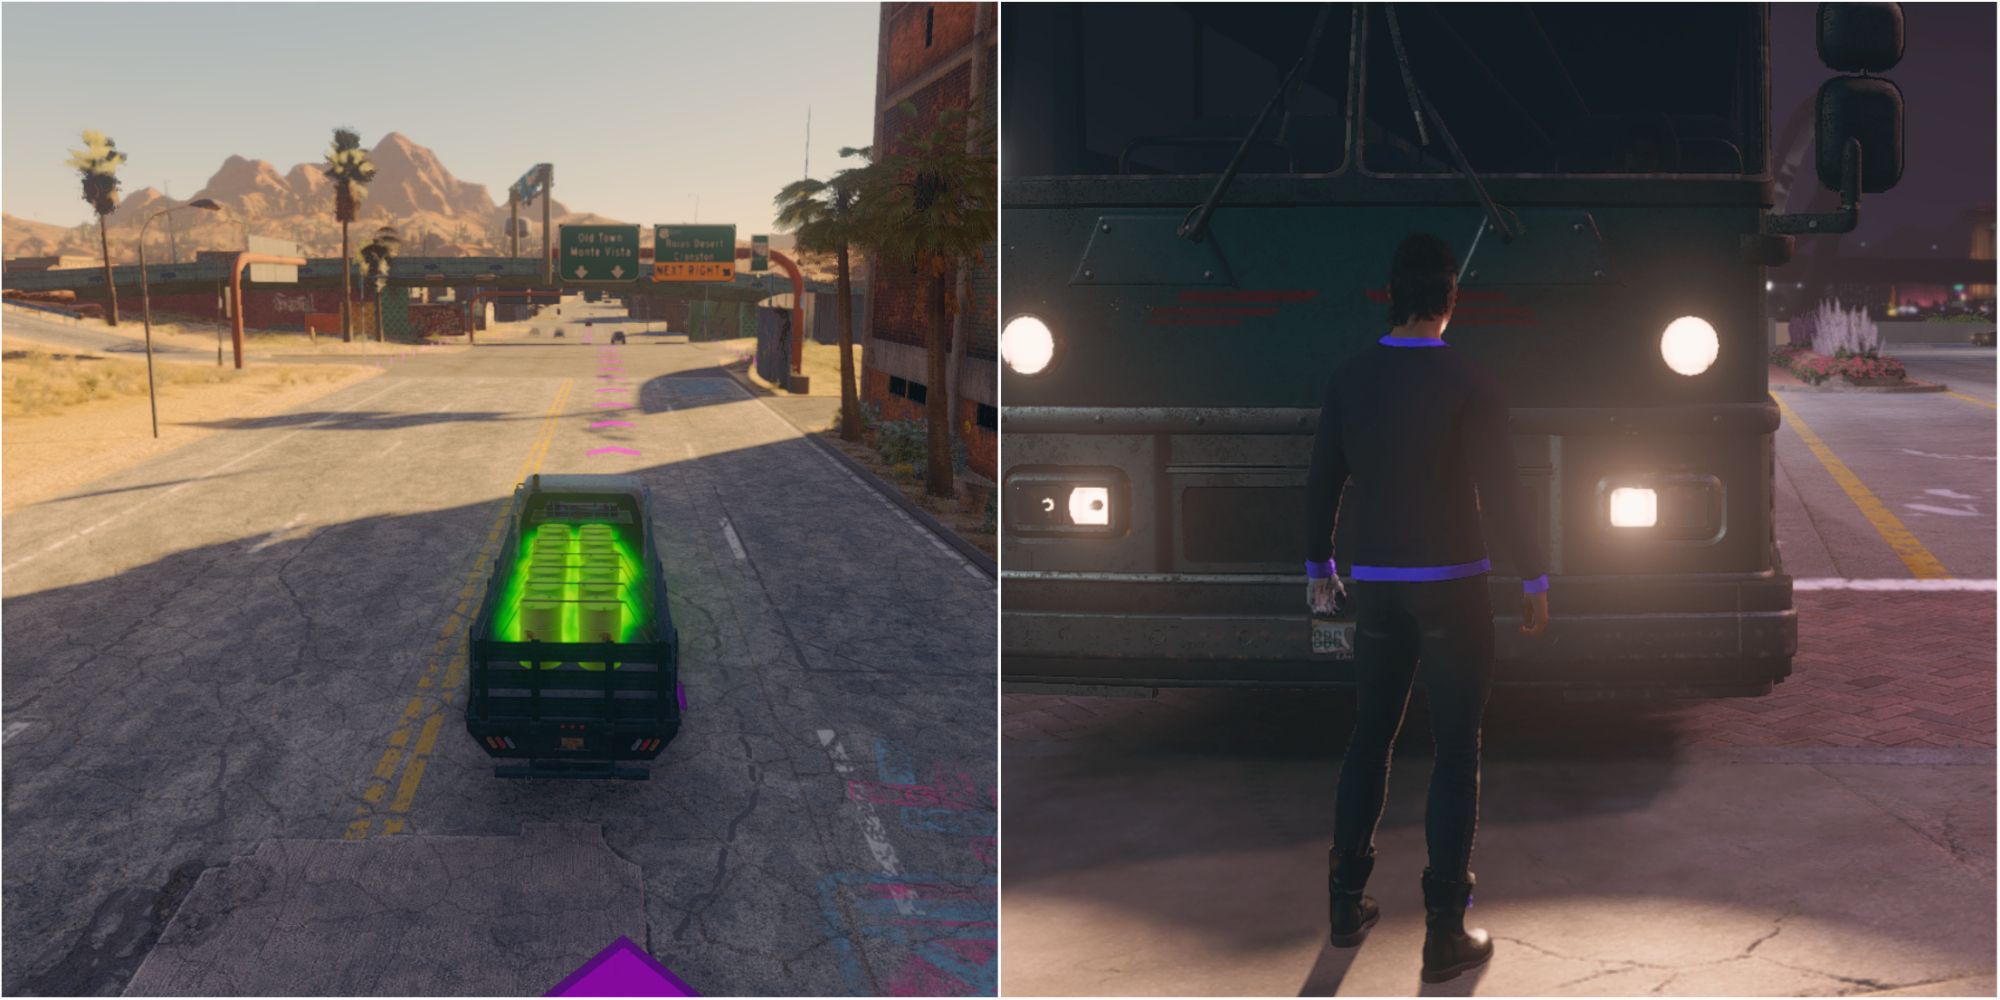 Saints Row Venture Quests Featured Split Image Toxic Waste and Insurance Fraud